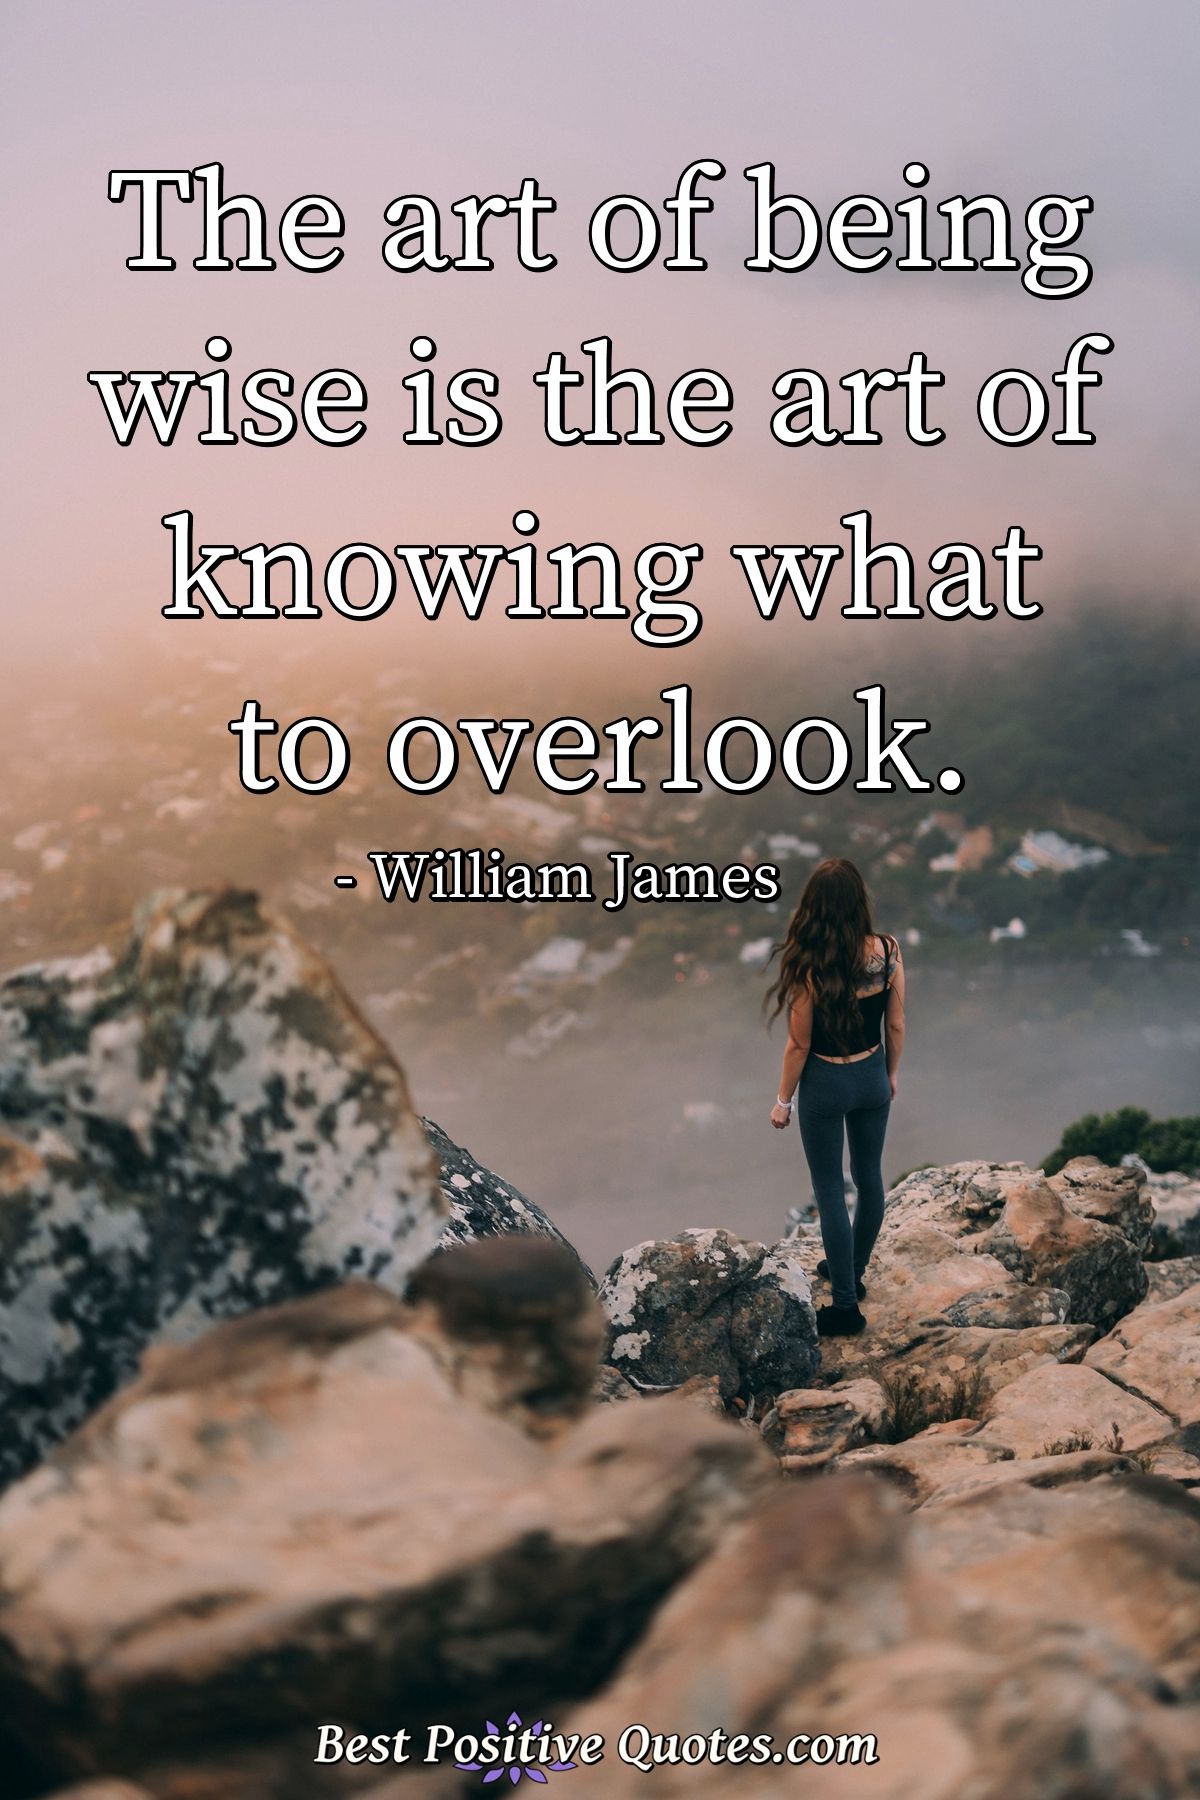 The art of being wise is the art of knowing what to overlook. - William James